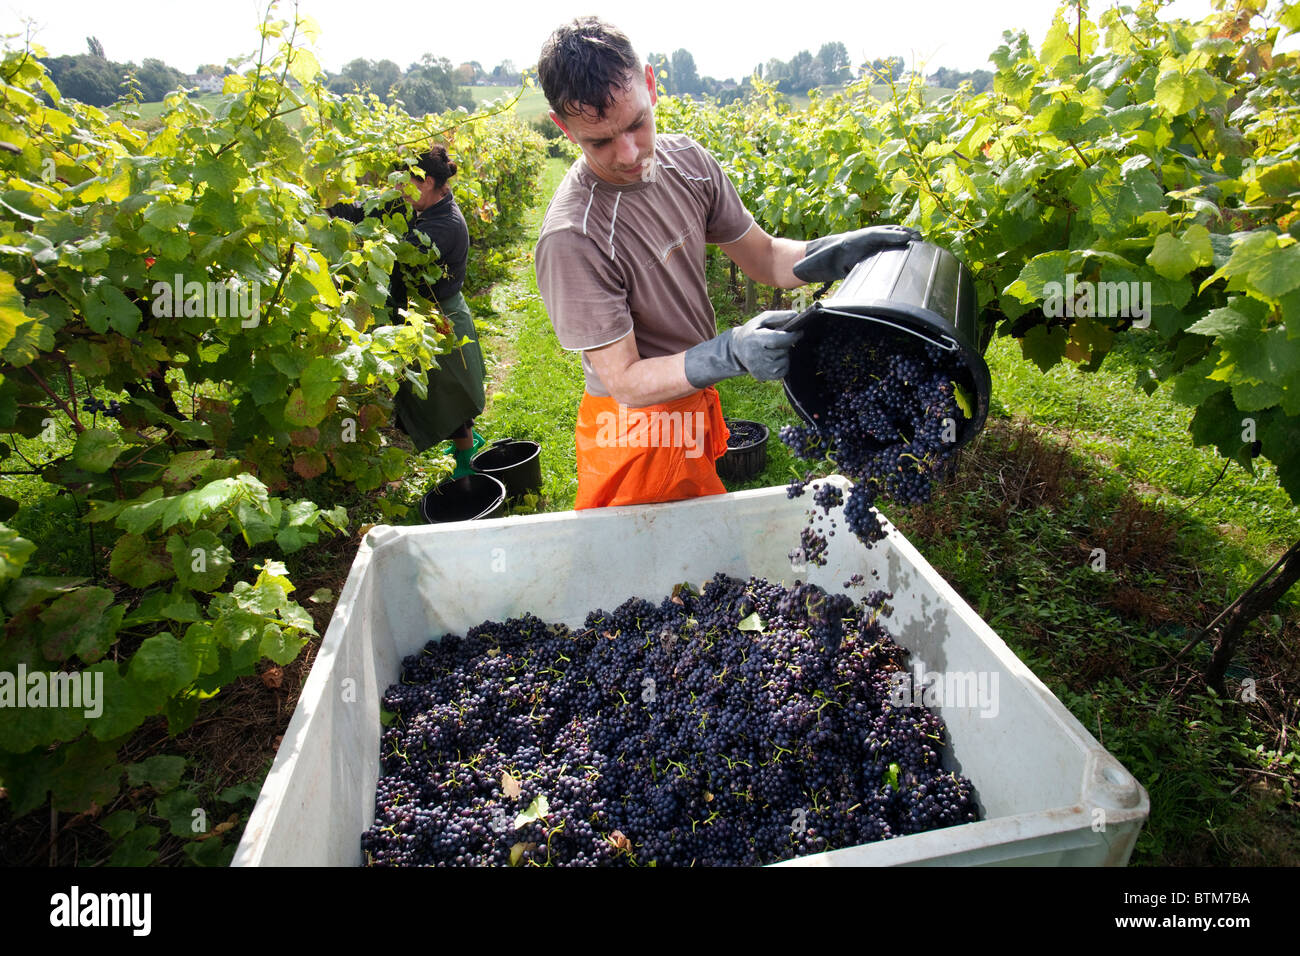 A Polish worker picking grapes at the Three Choirs Vineyard in Herefordshire, UK Stock Photo